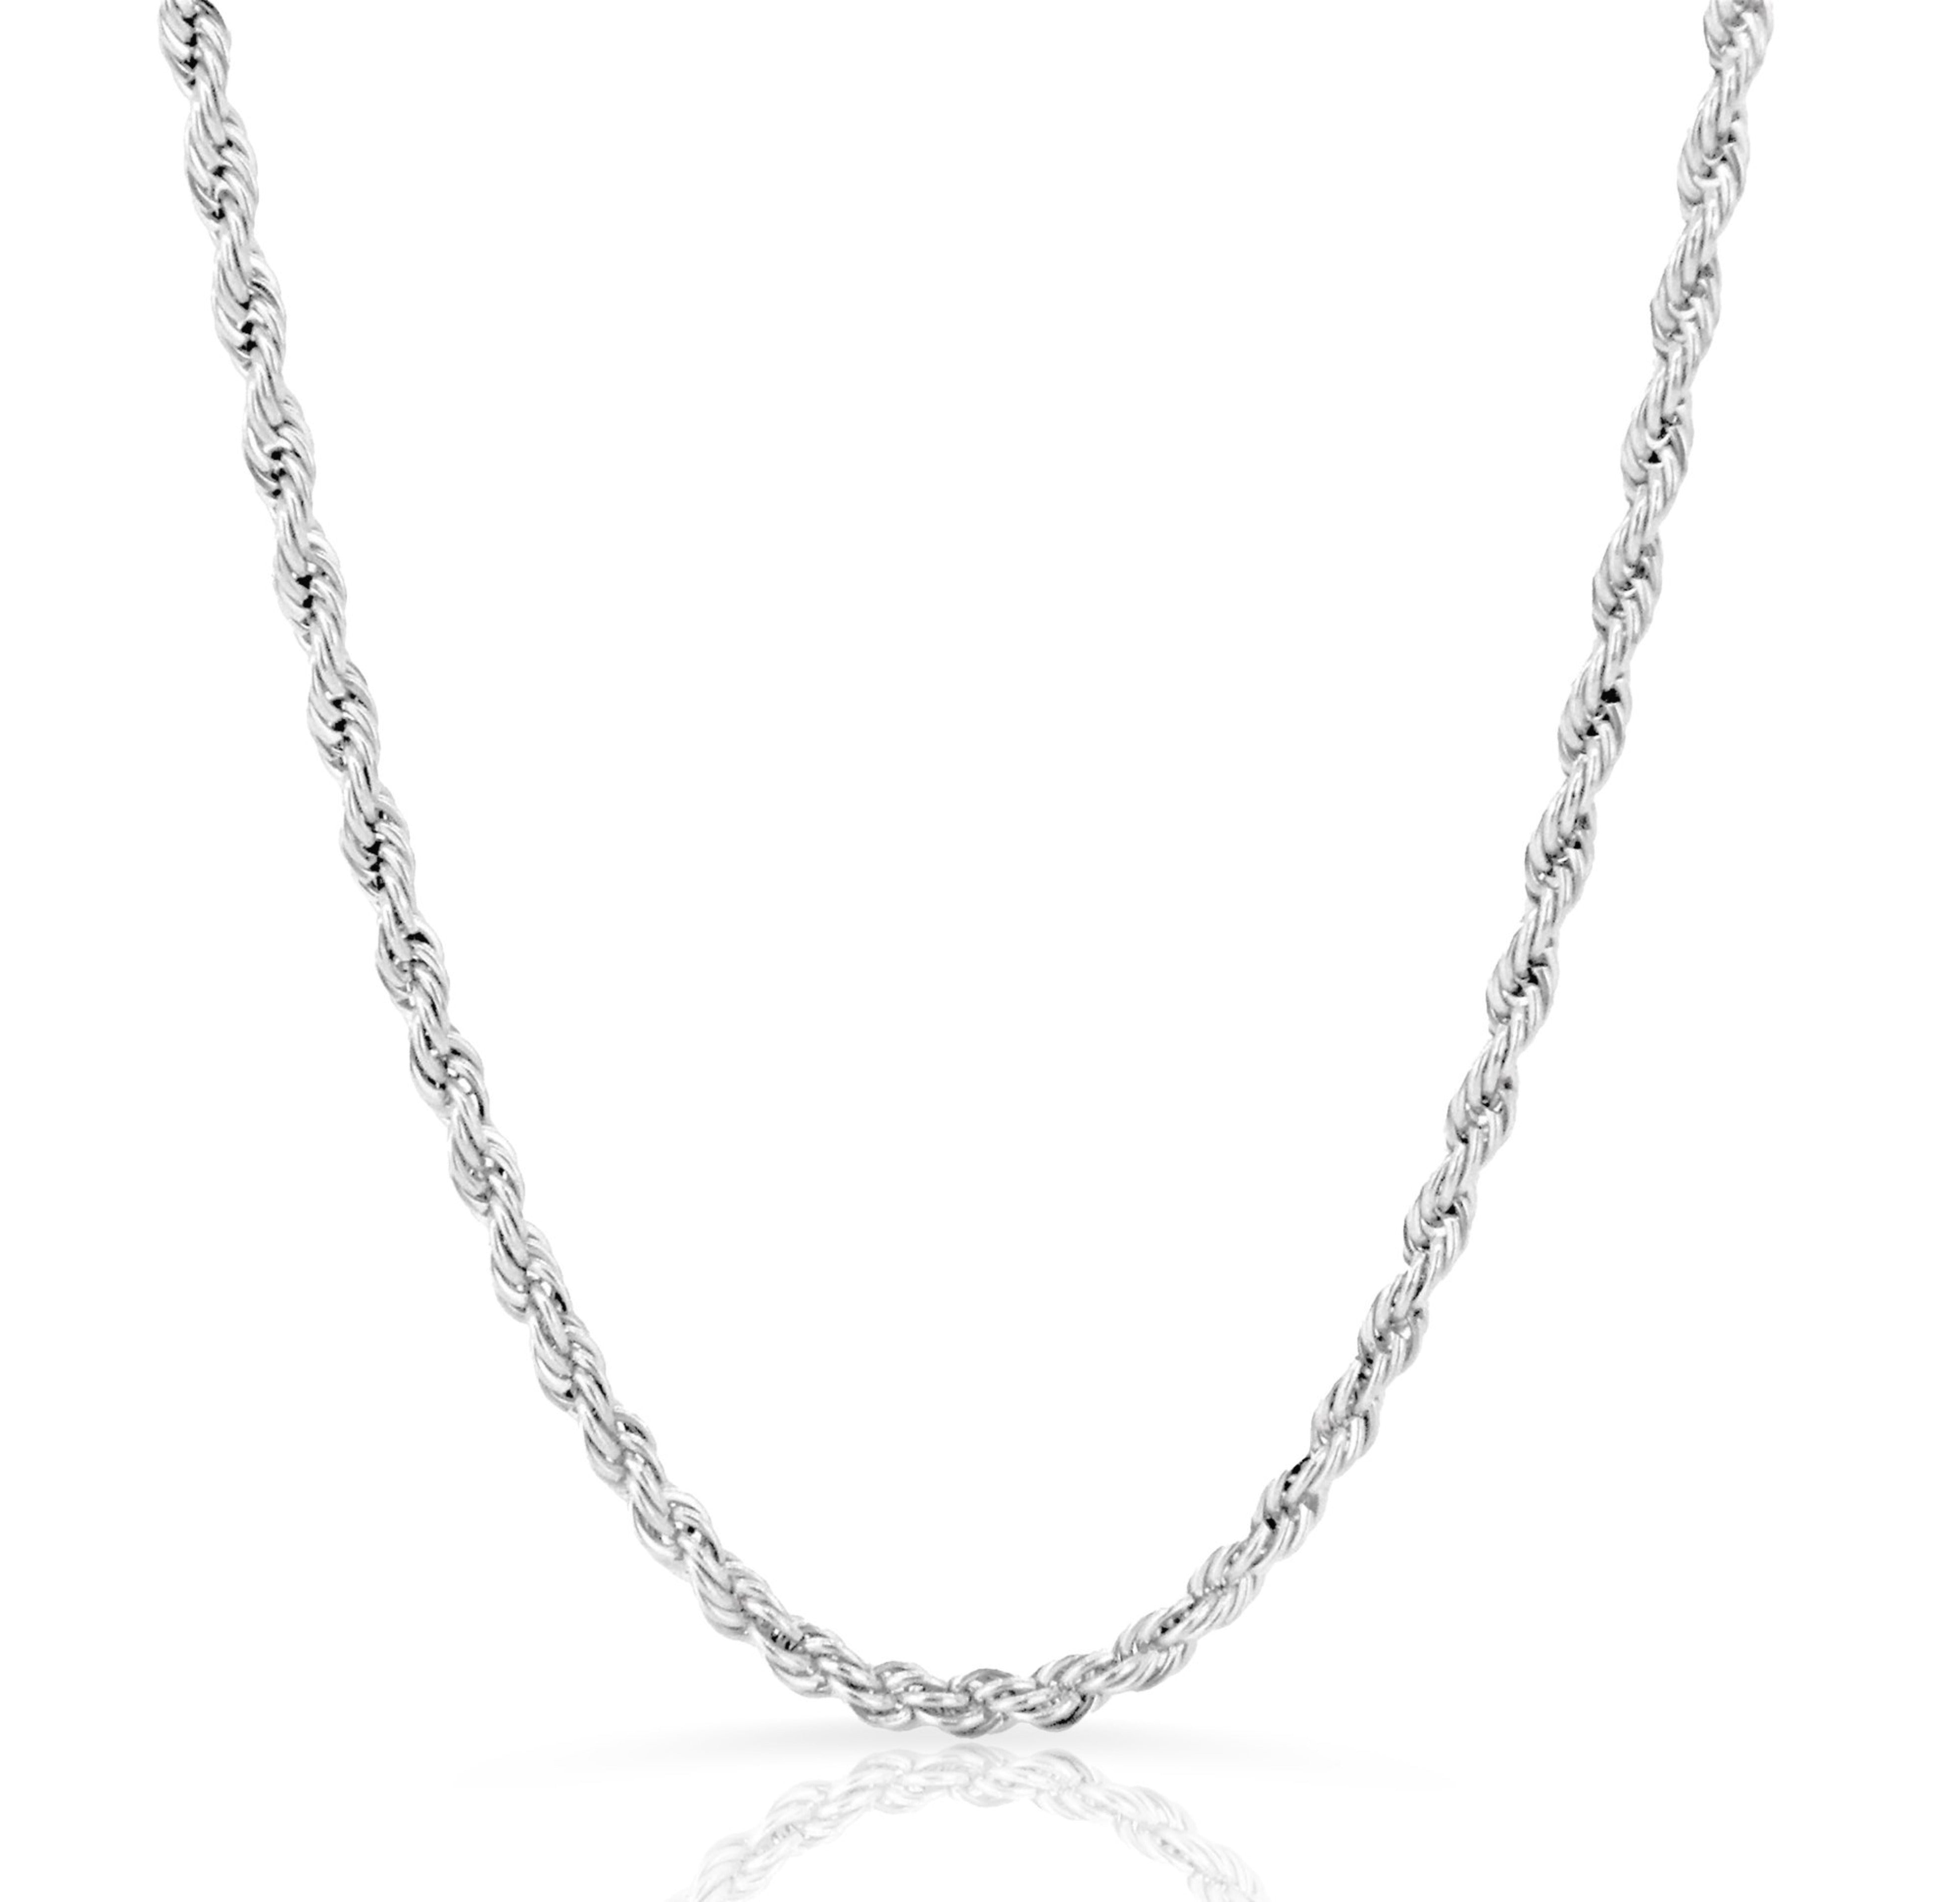 silver rope chain necklace waterproof